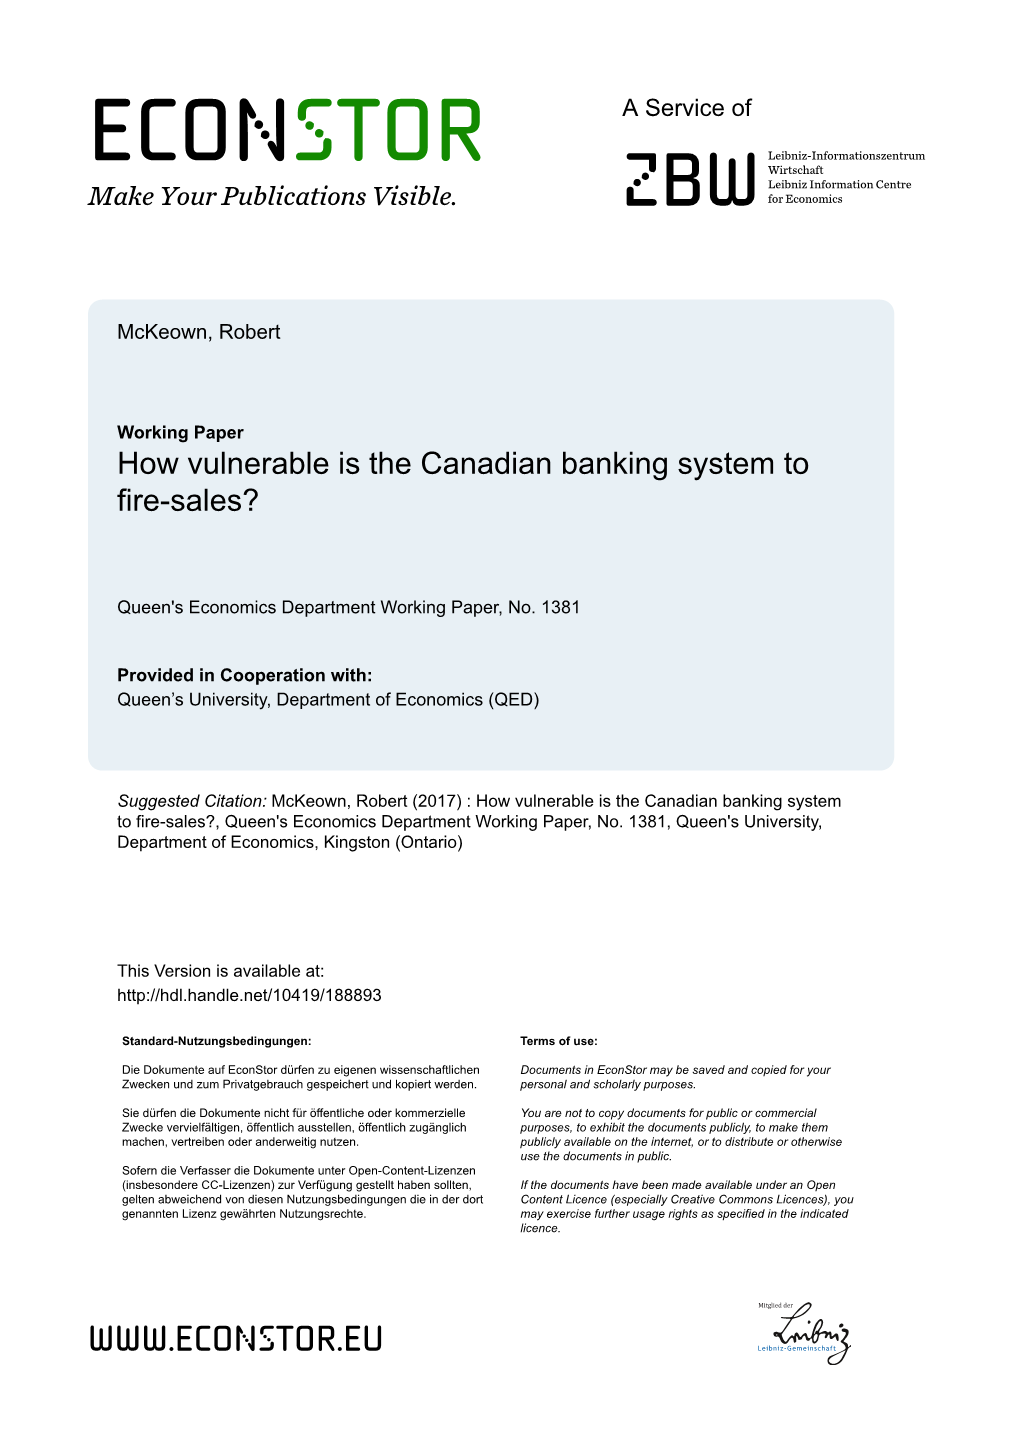 How Vulnerable Is the Canadian Banking System to Fire-Sales?